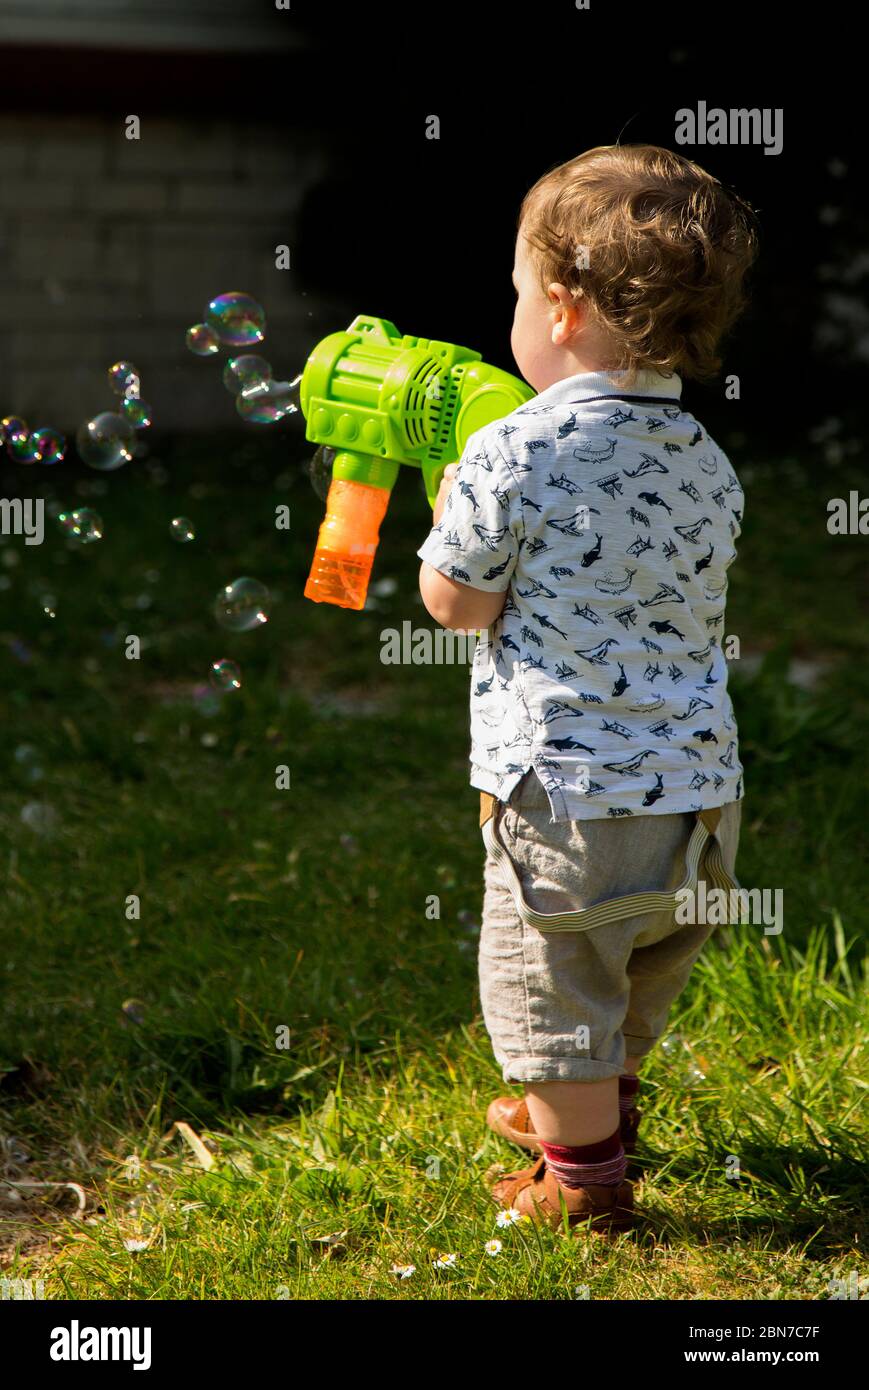 young boy playing with a bubble machine gun Stock Photo